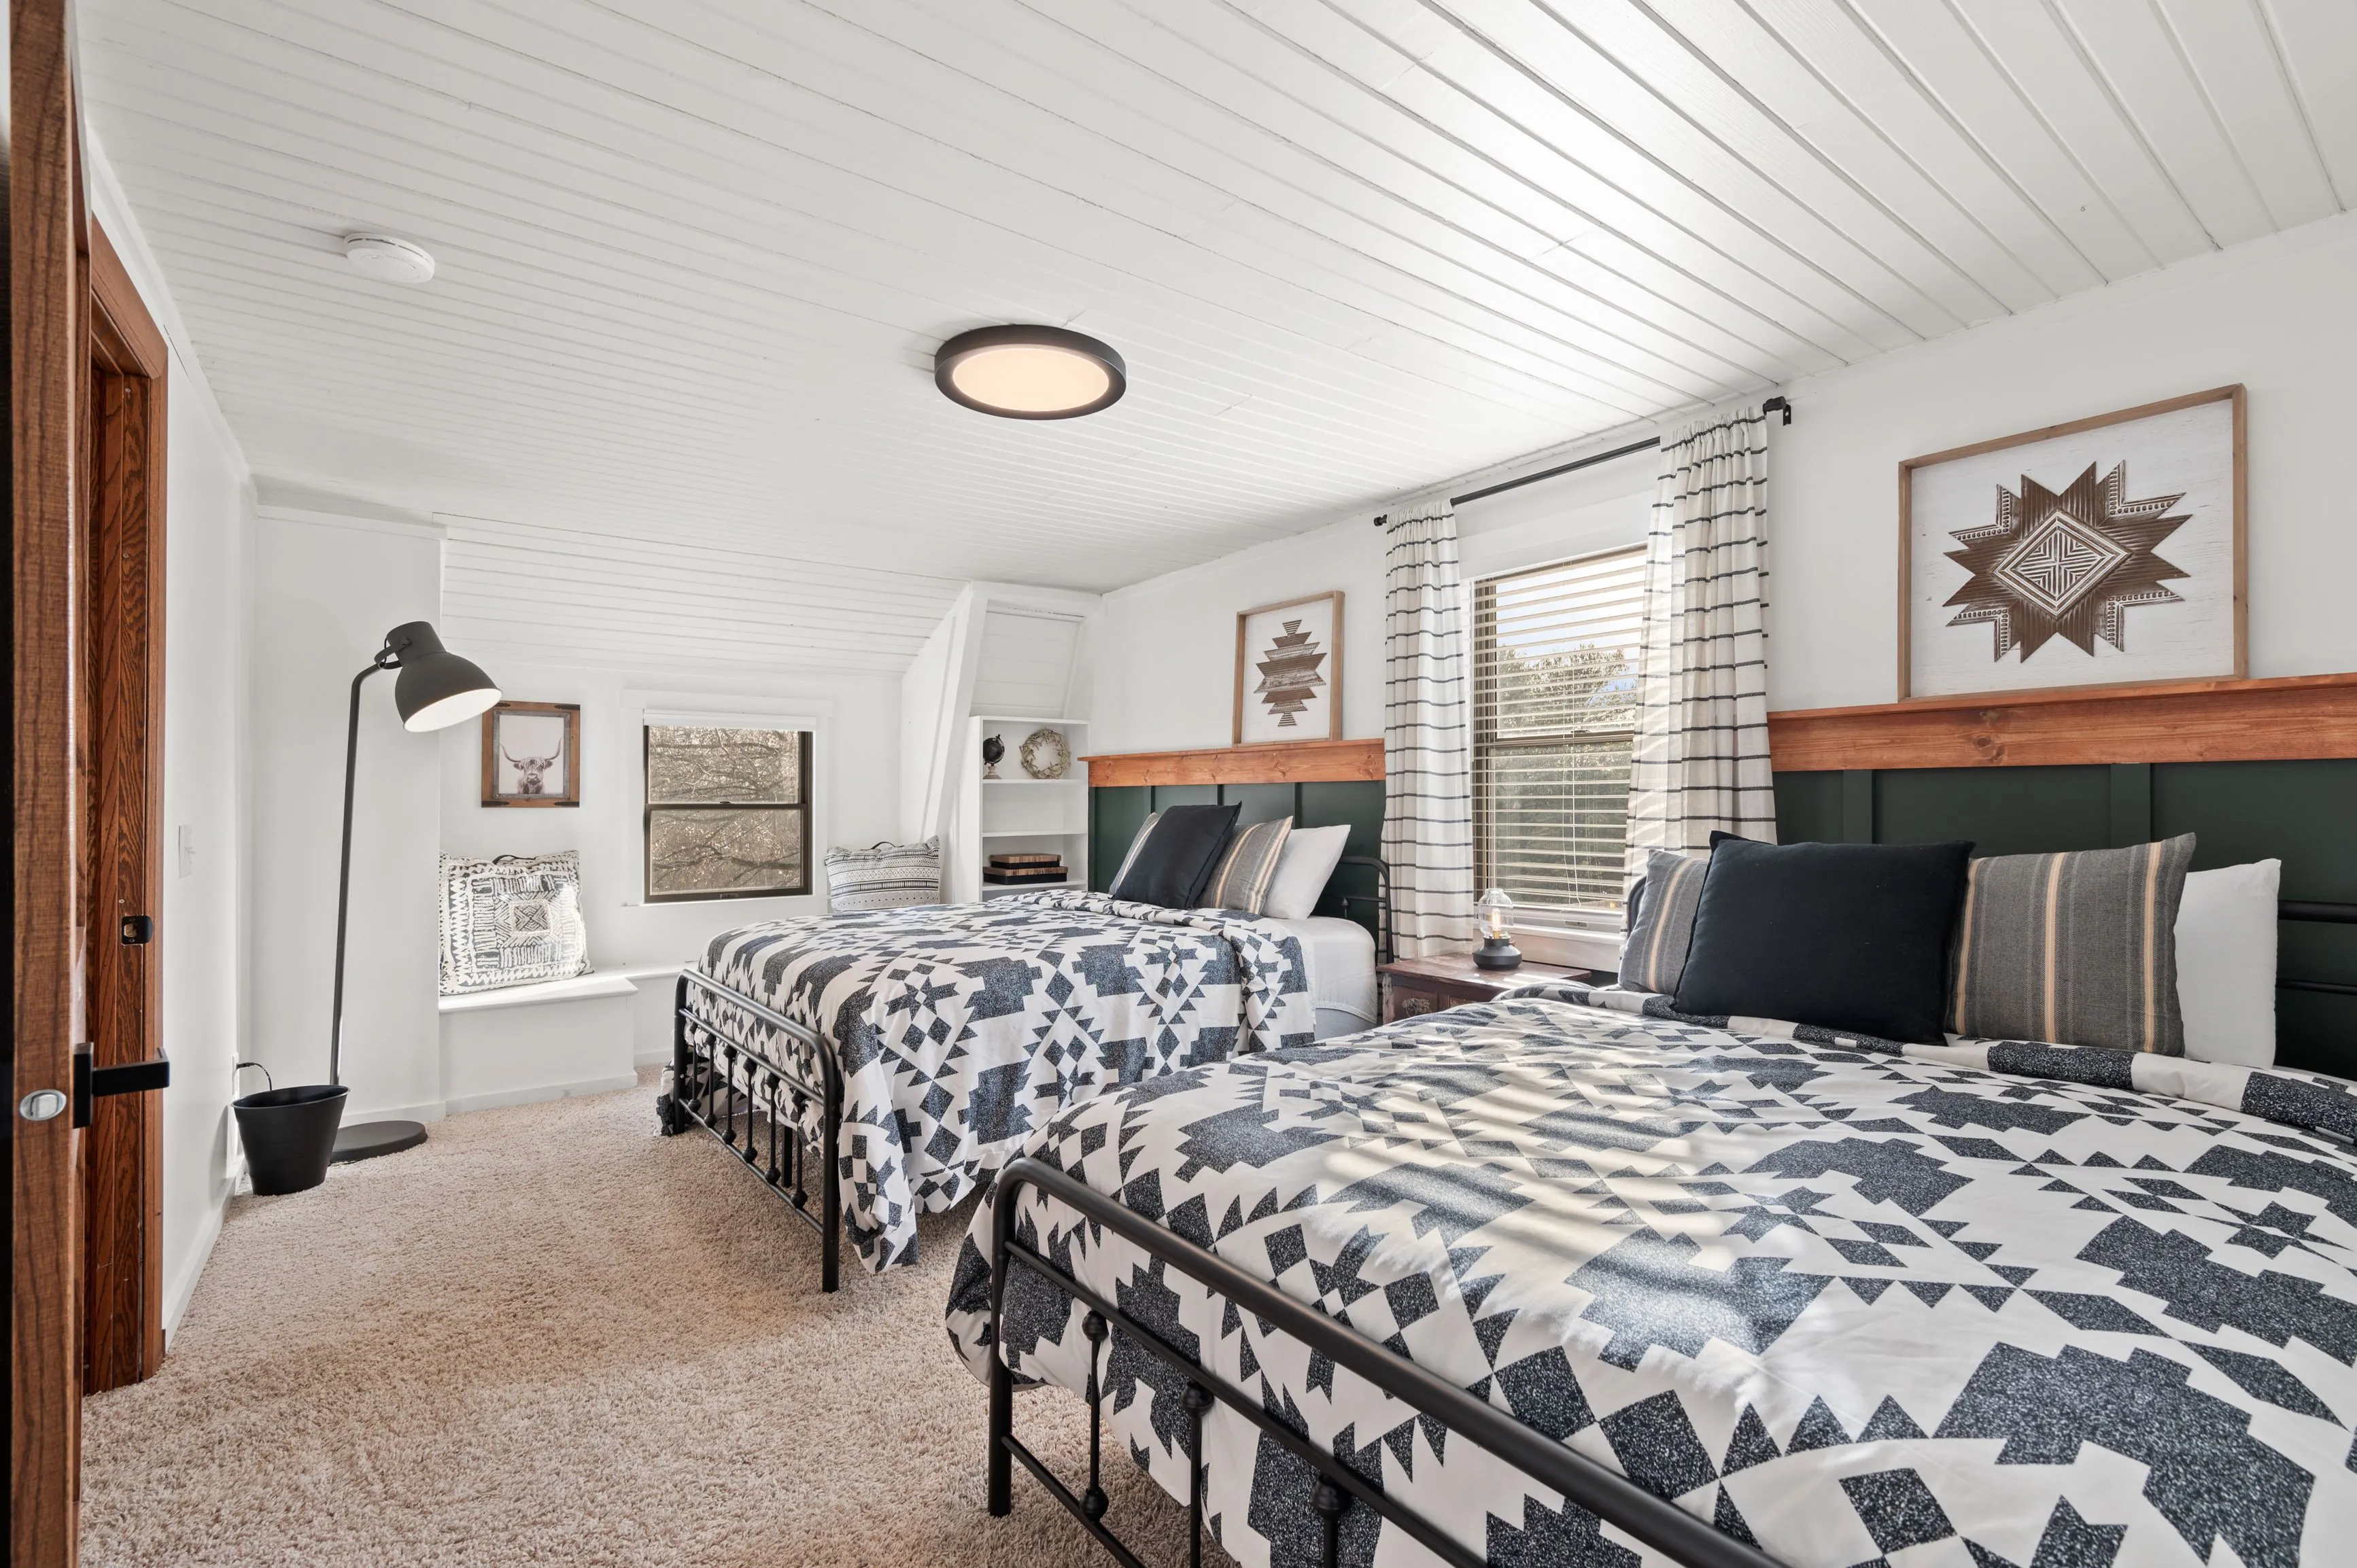 Bright and cozy bedroom with two single beds covered in matching quilts, white beadboard ceiling, window with blinds, and decorative wall art.